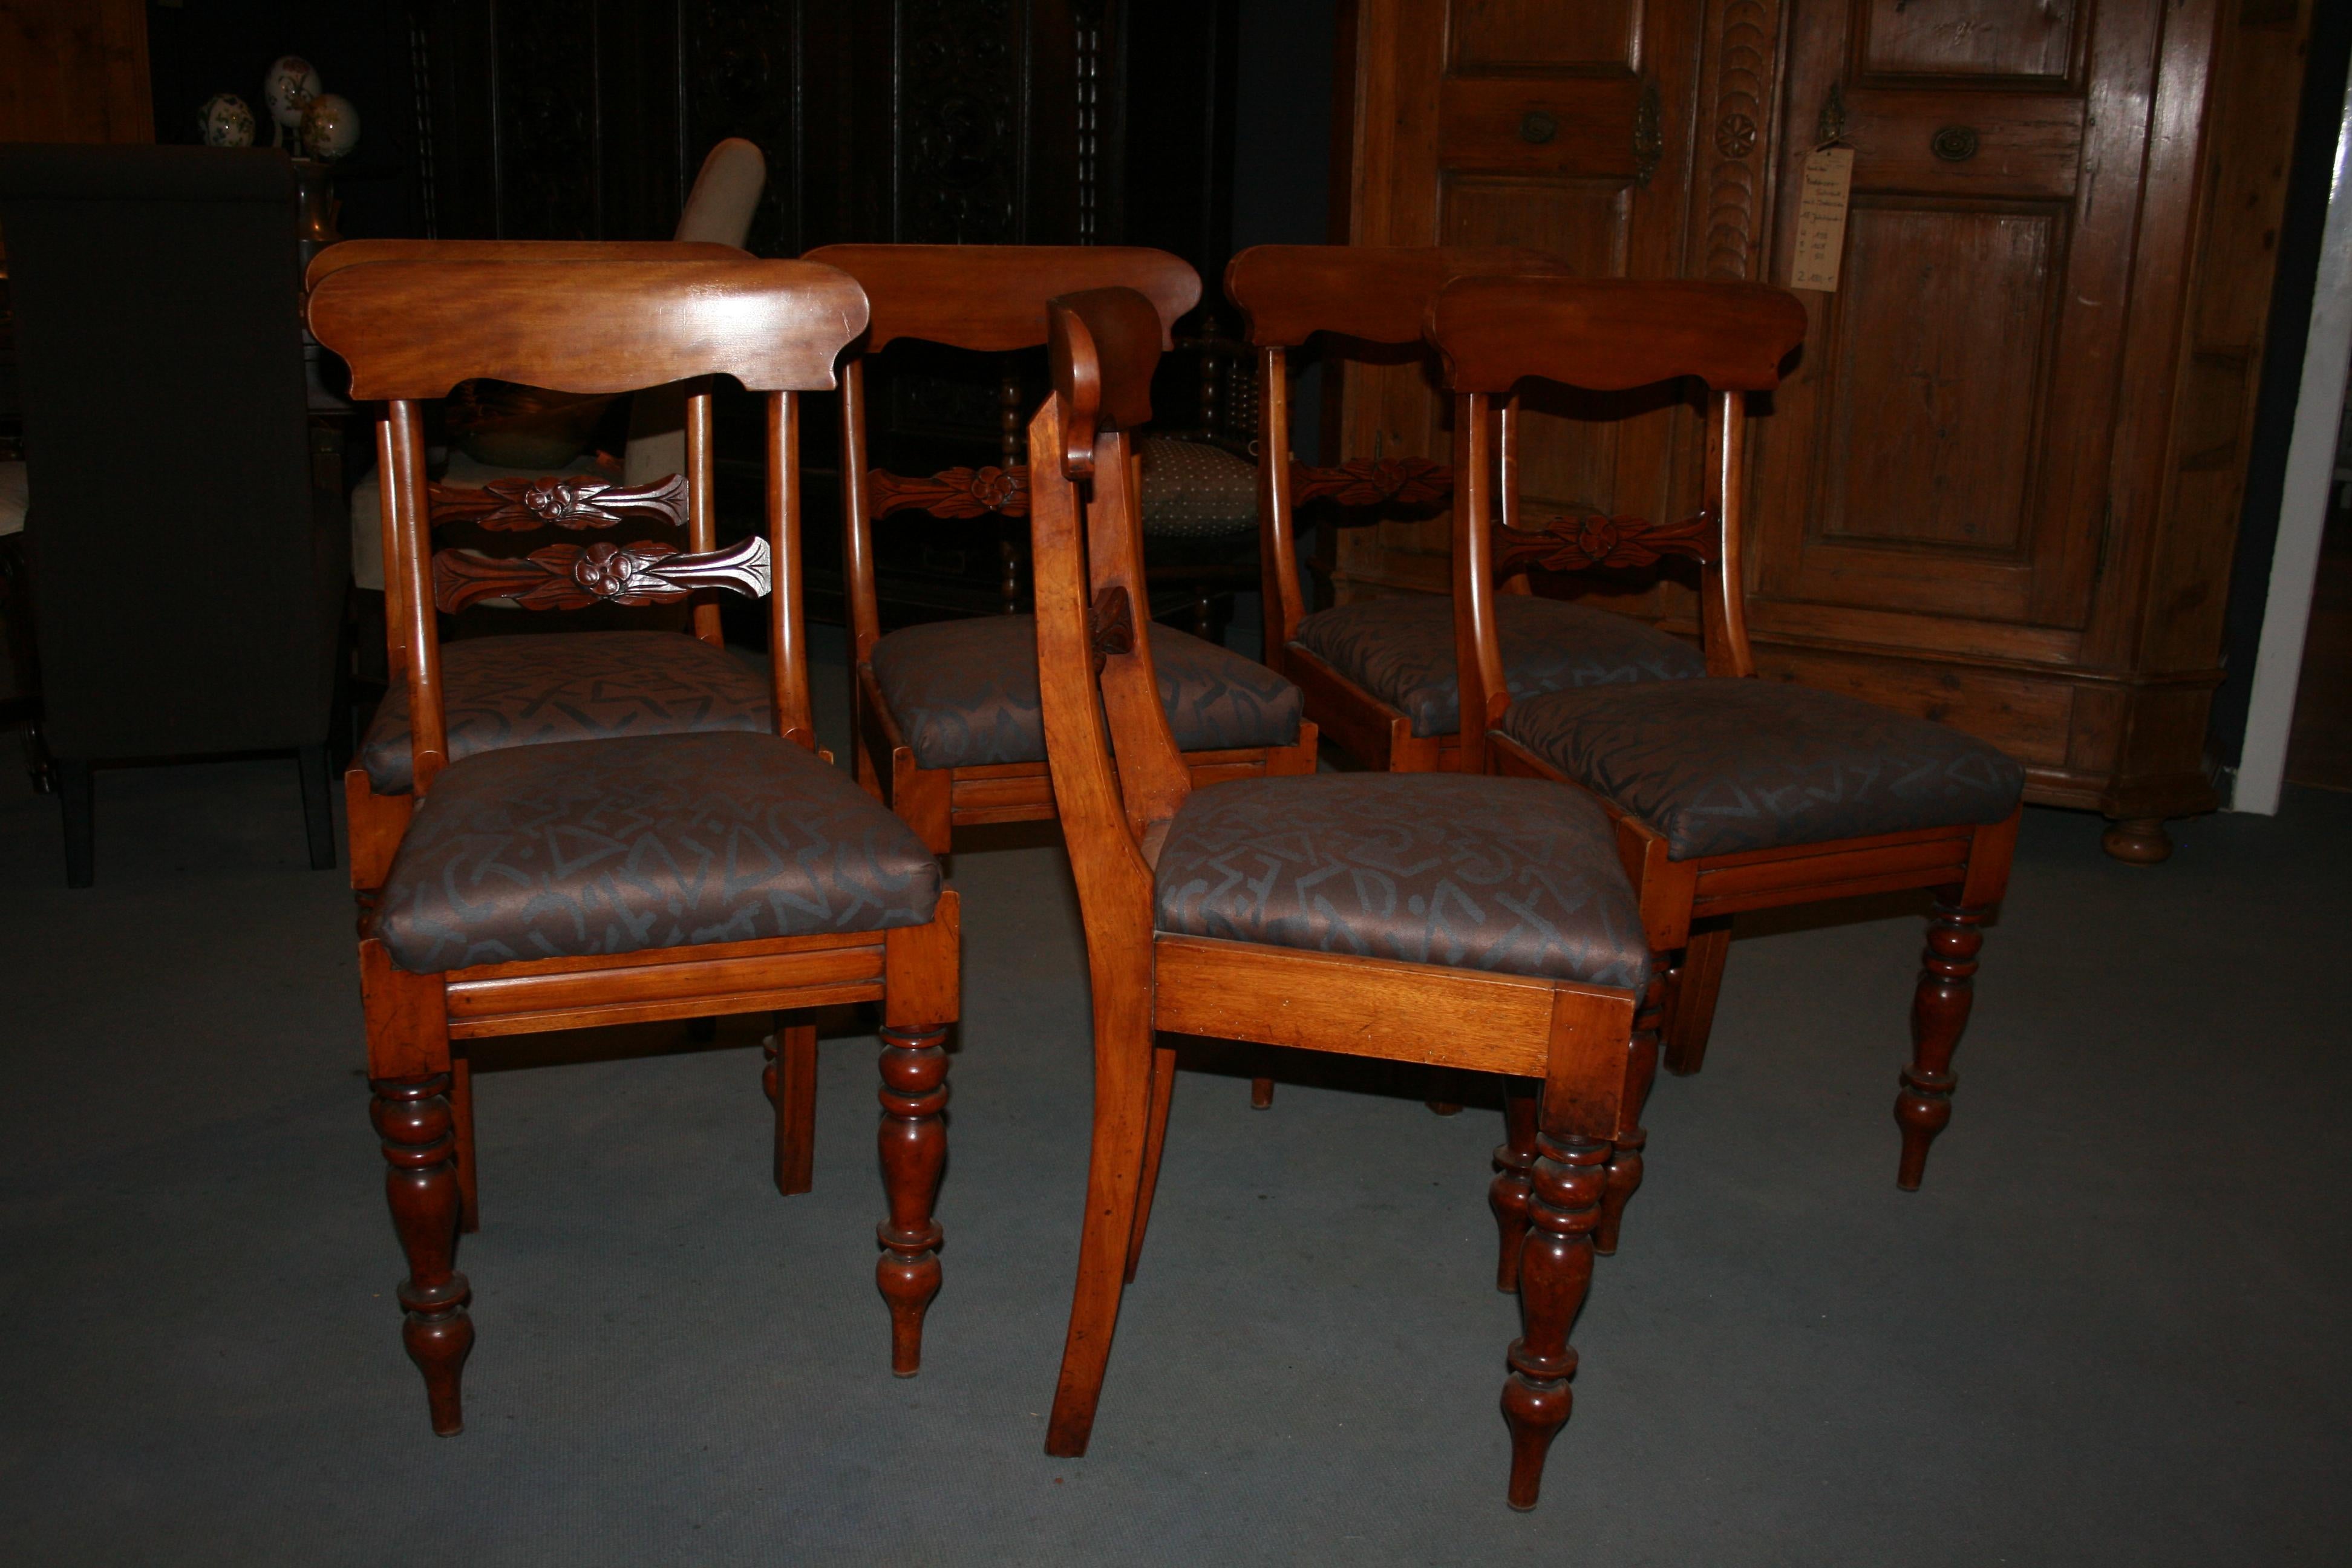 Antique chair group consisting of 6 chairs. All chairs with newly upholstered seat and new cover.